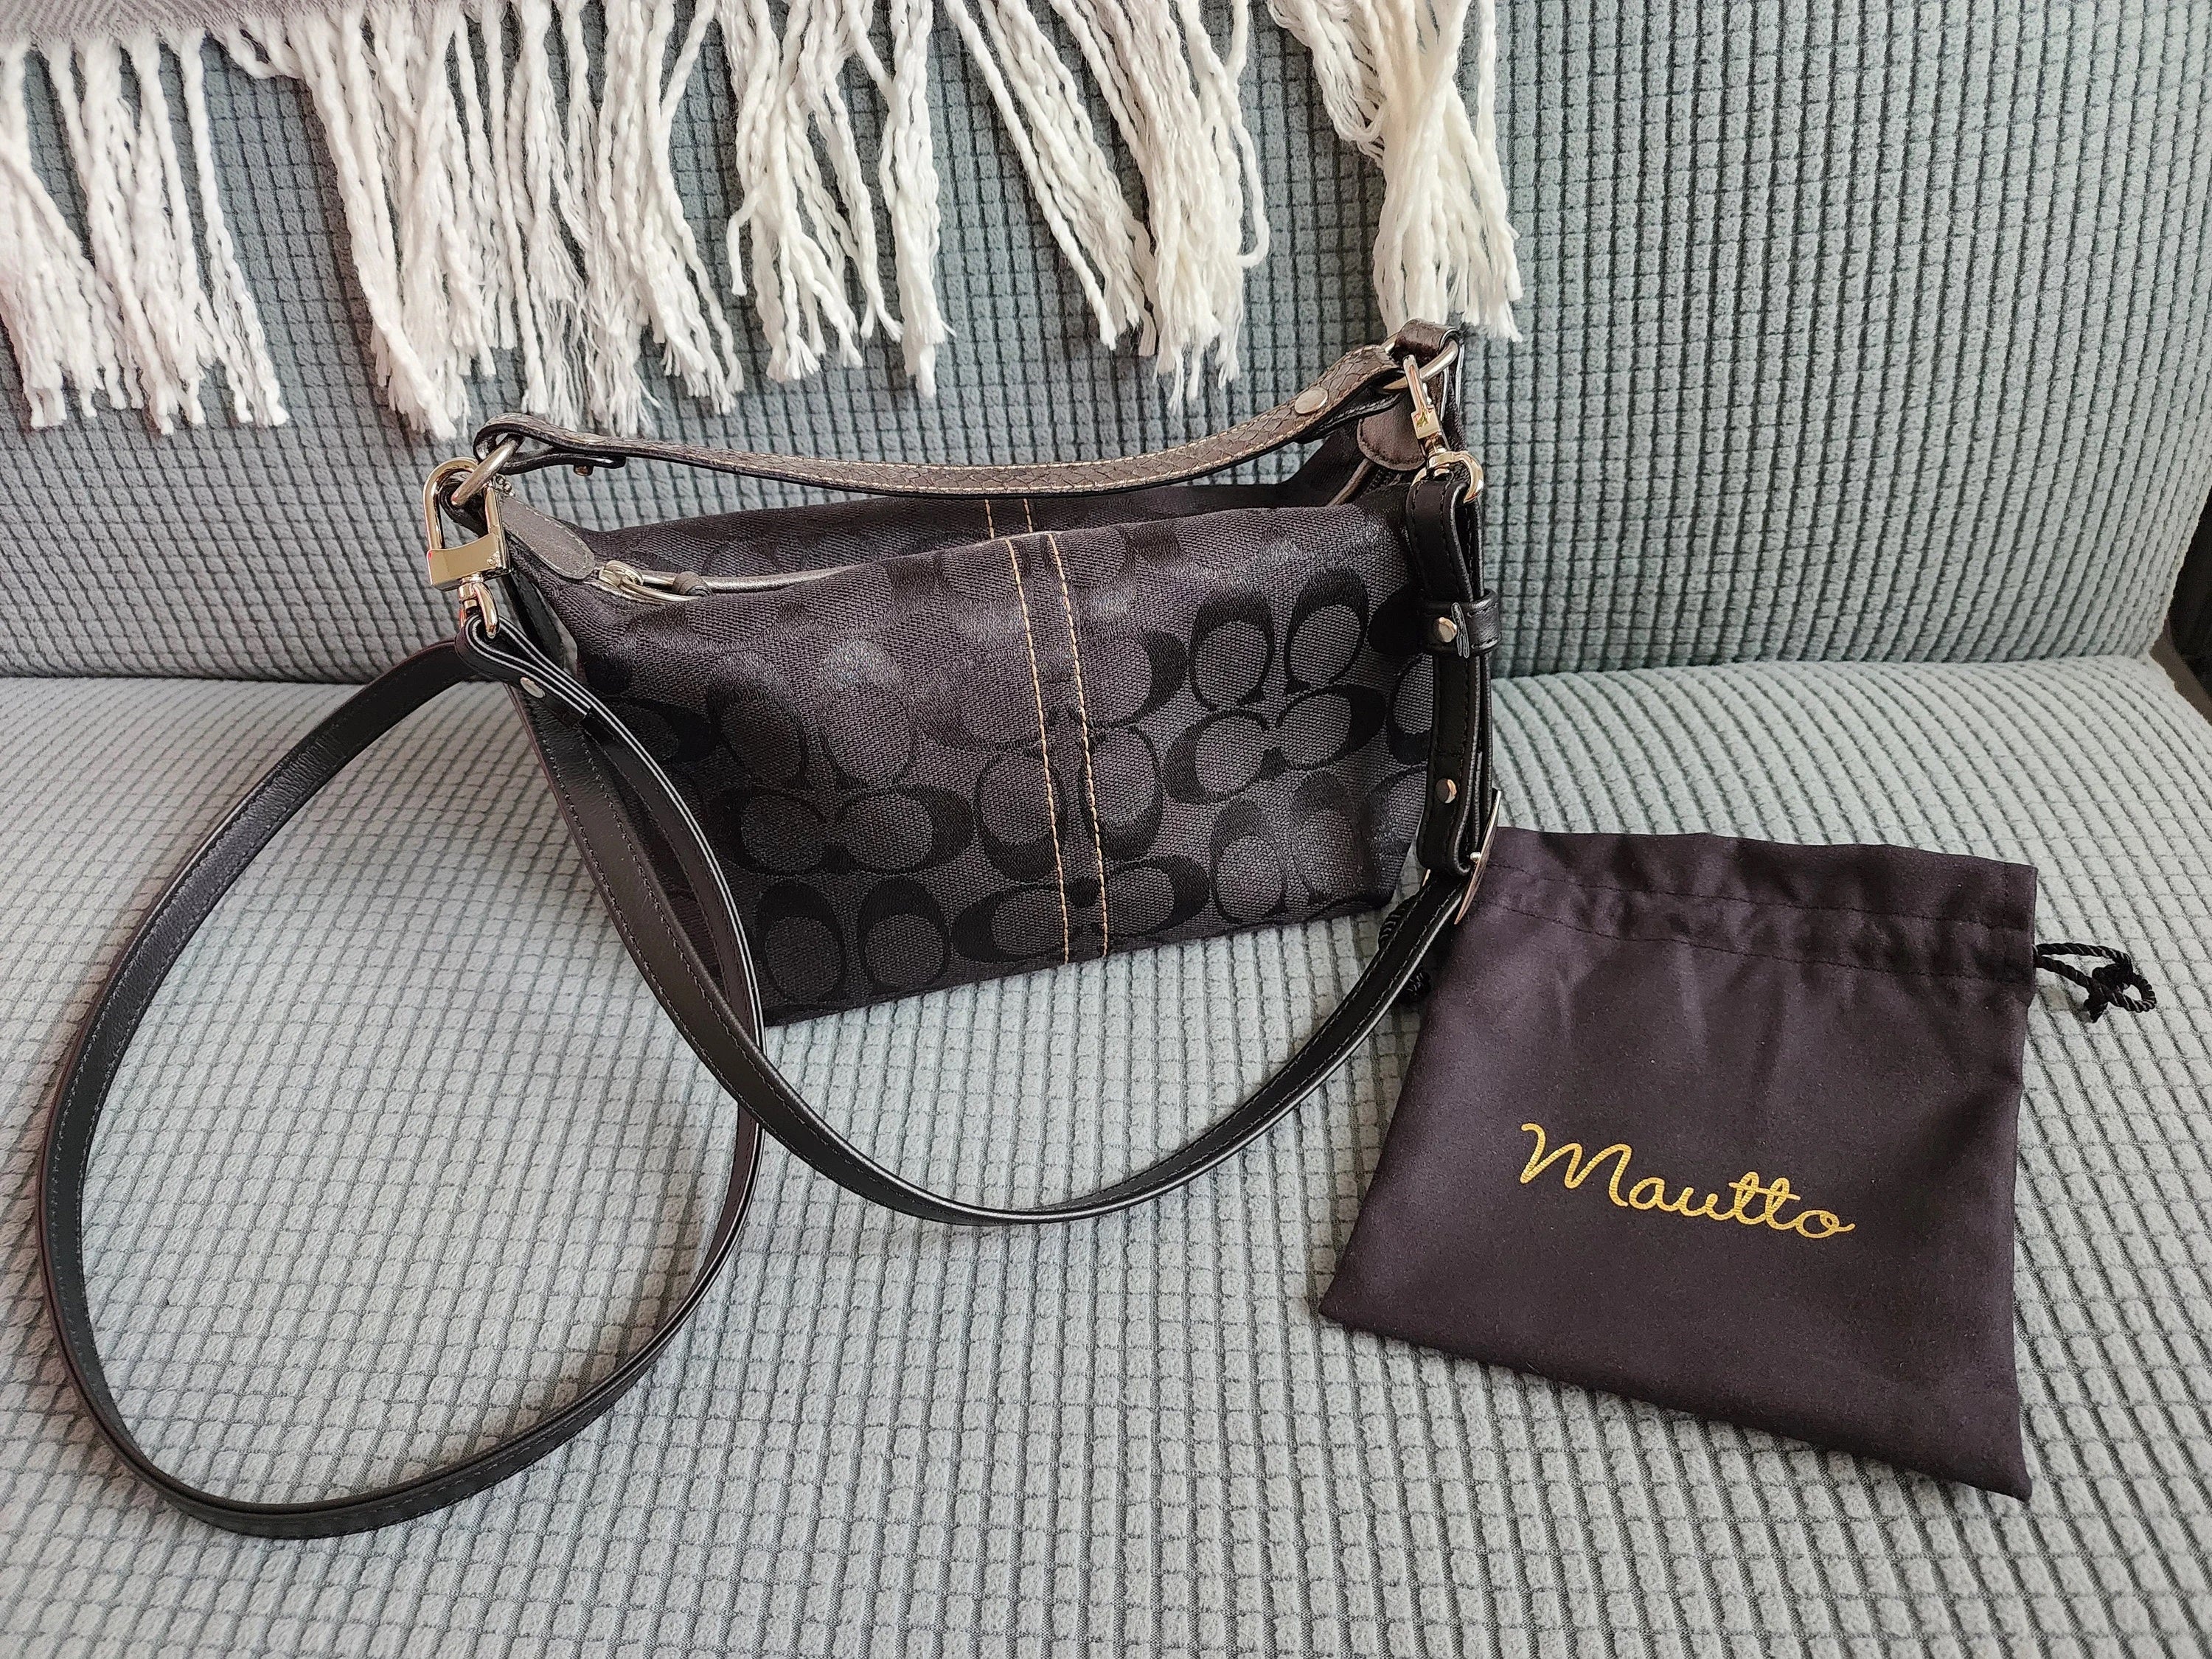 The Nylon Purse Strap with Coin Purse Collection – SidecarLove